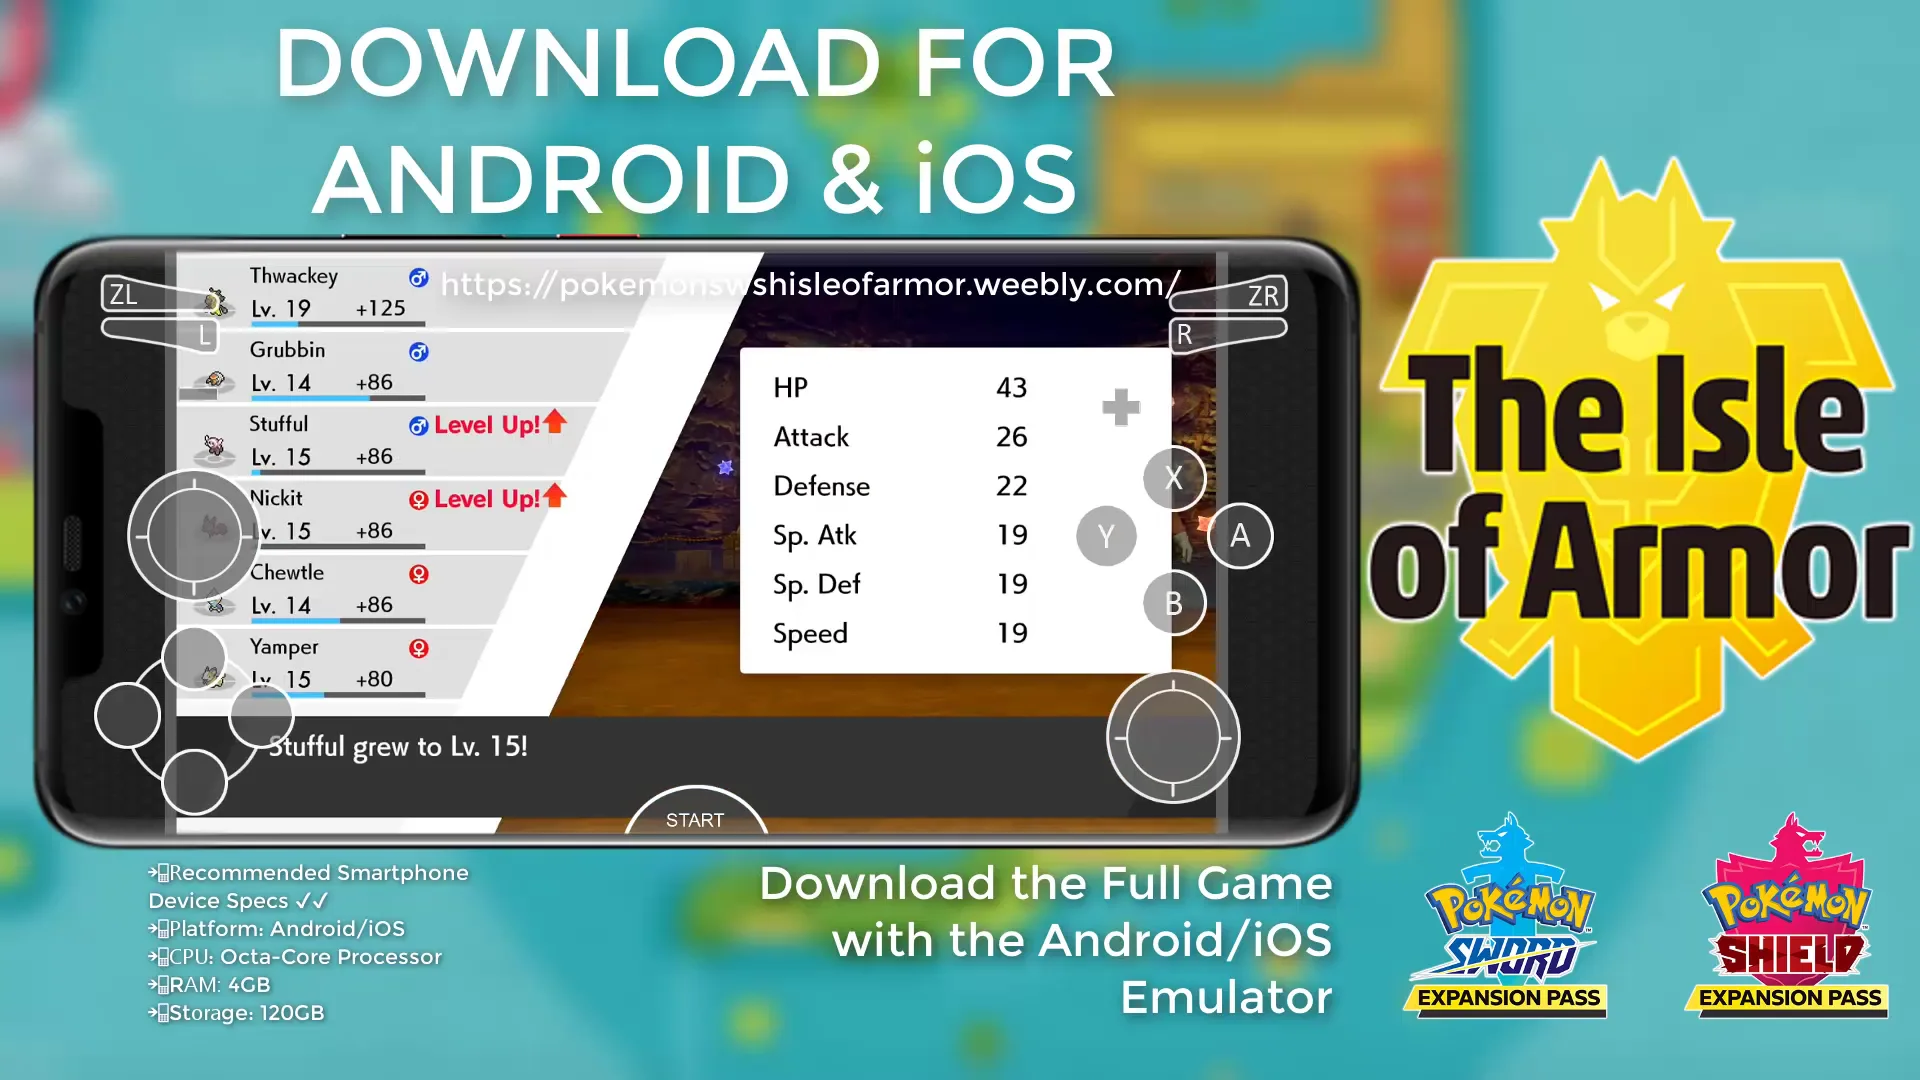 English Version] Pokémon Shield Apk Download On Android, 100% Working